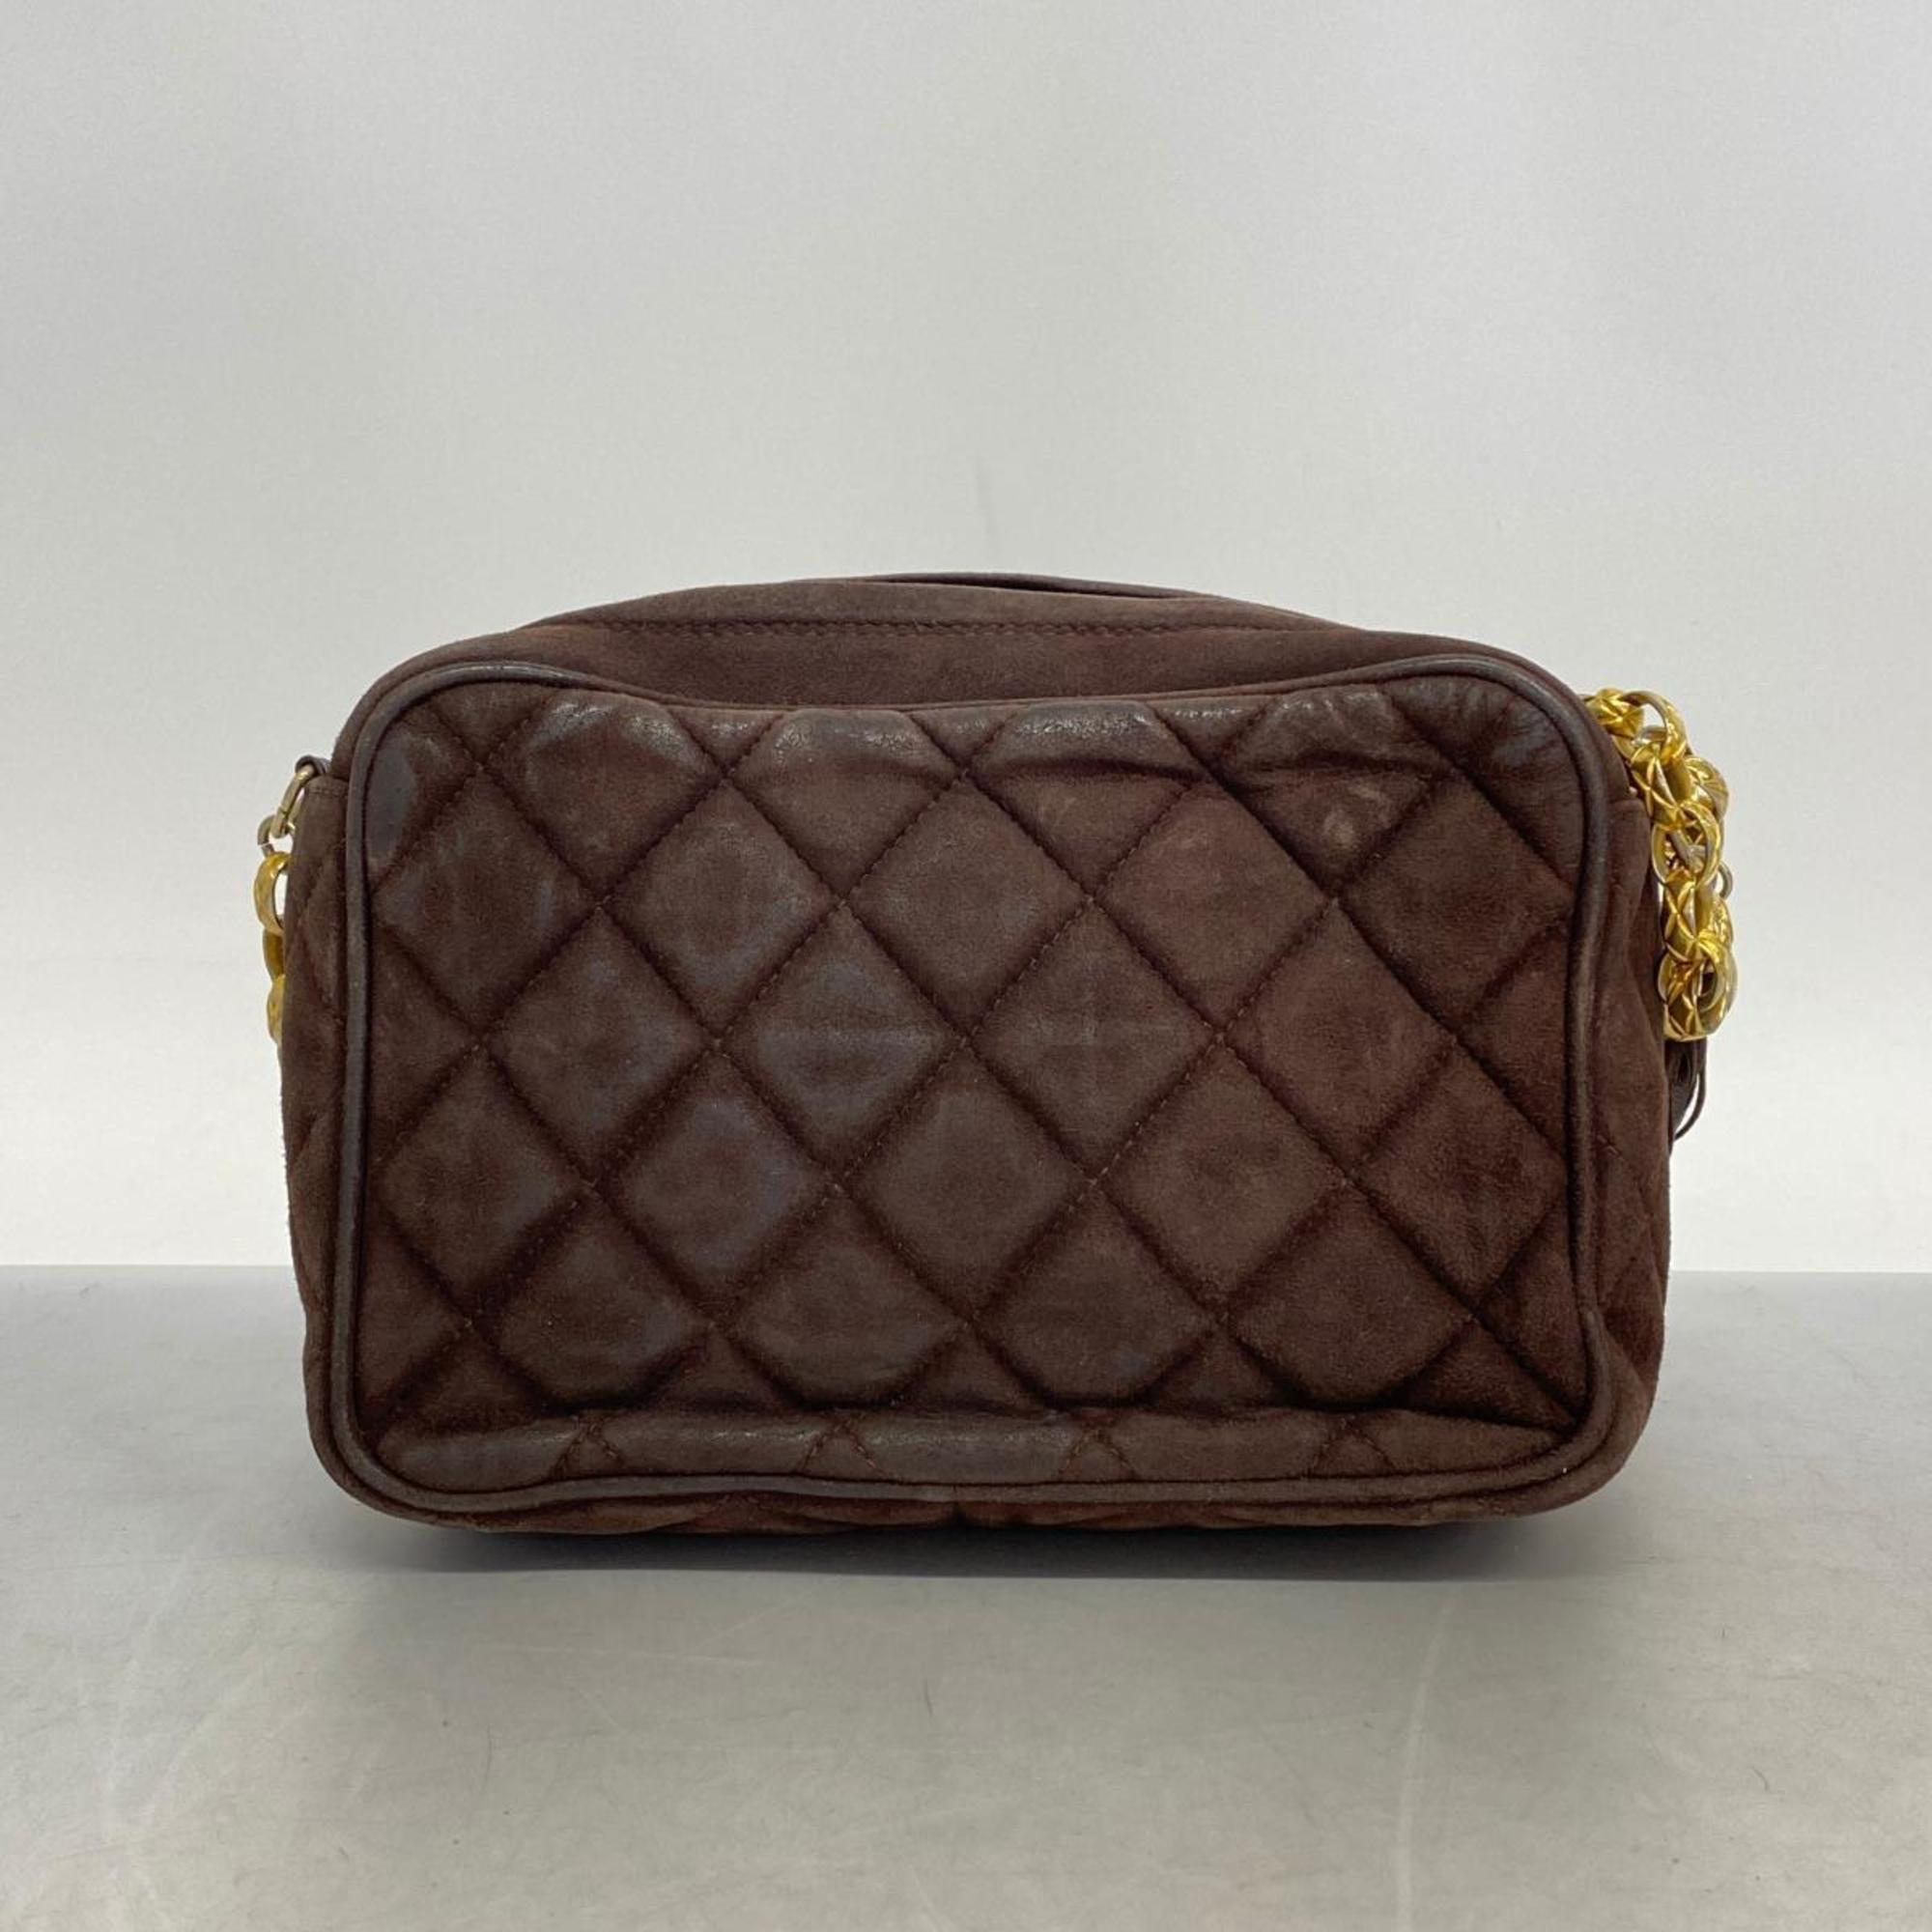 Chanel Shoulder Bag with Matelasse Suede Brown Women's